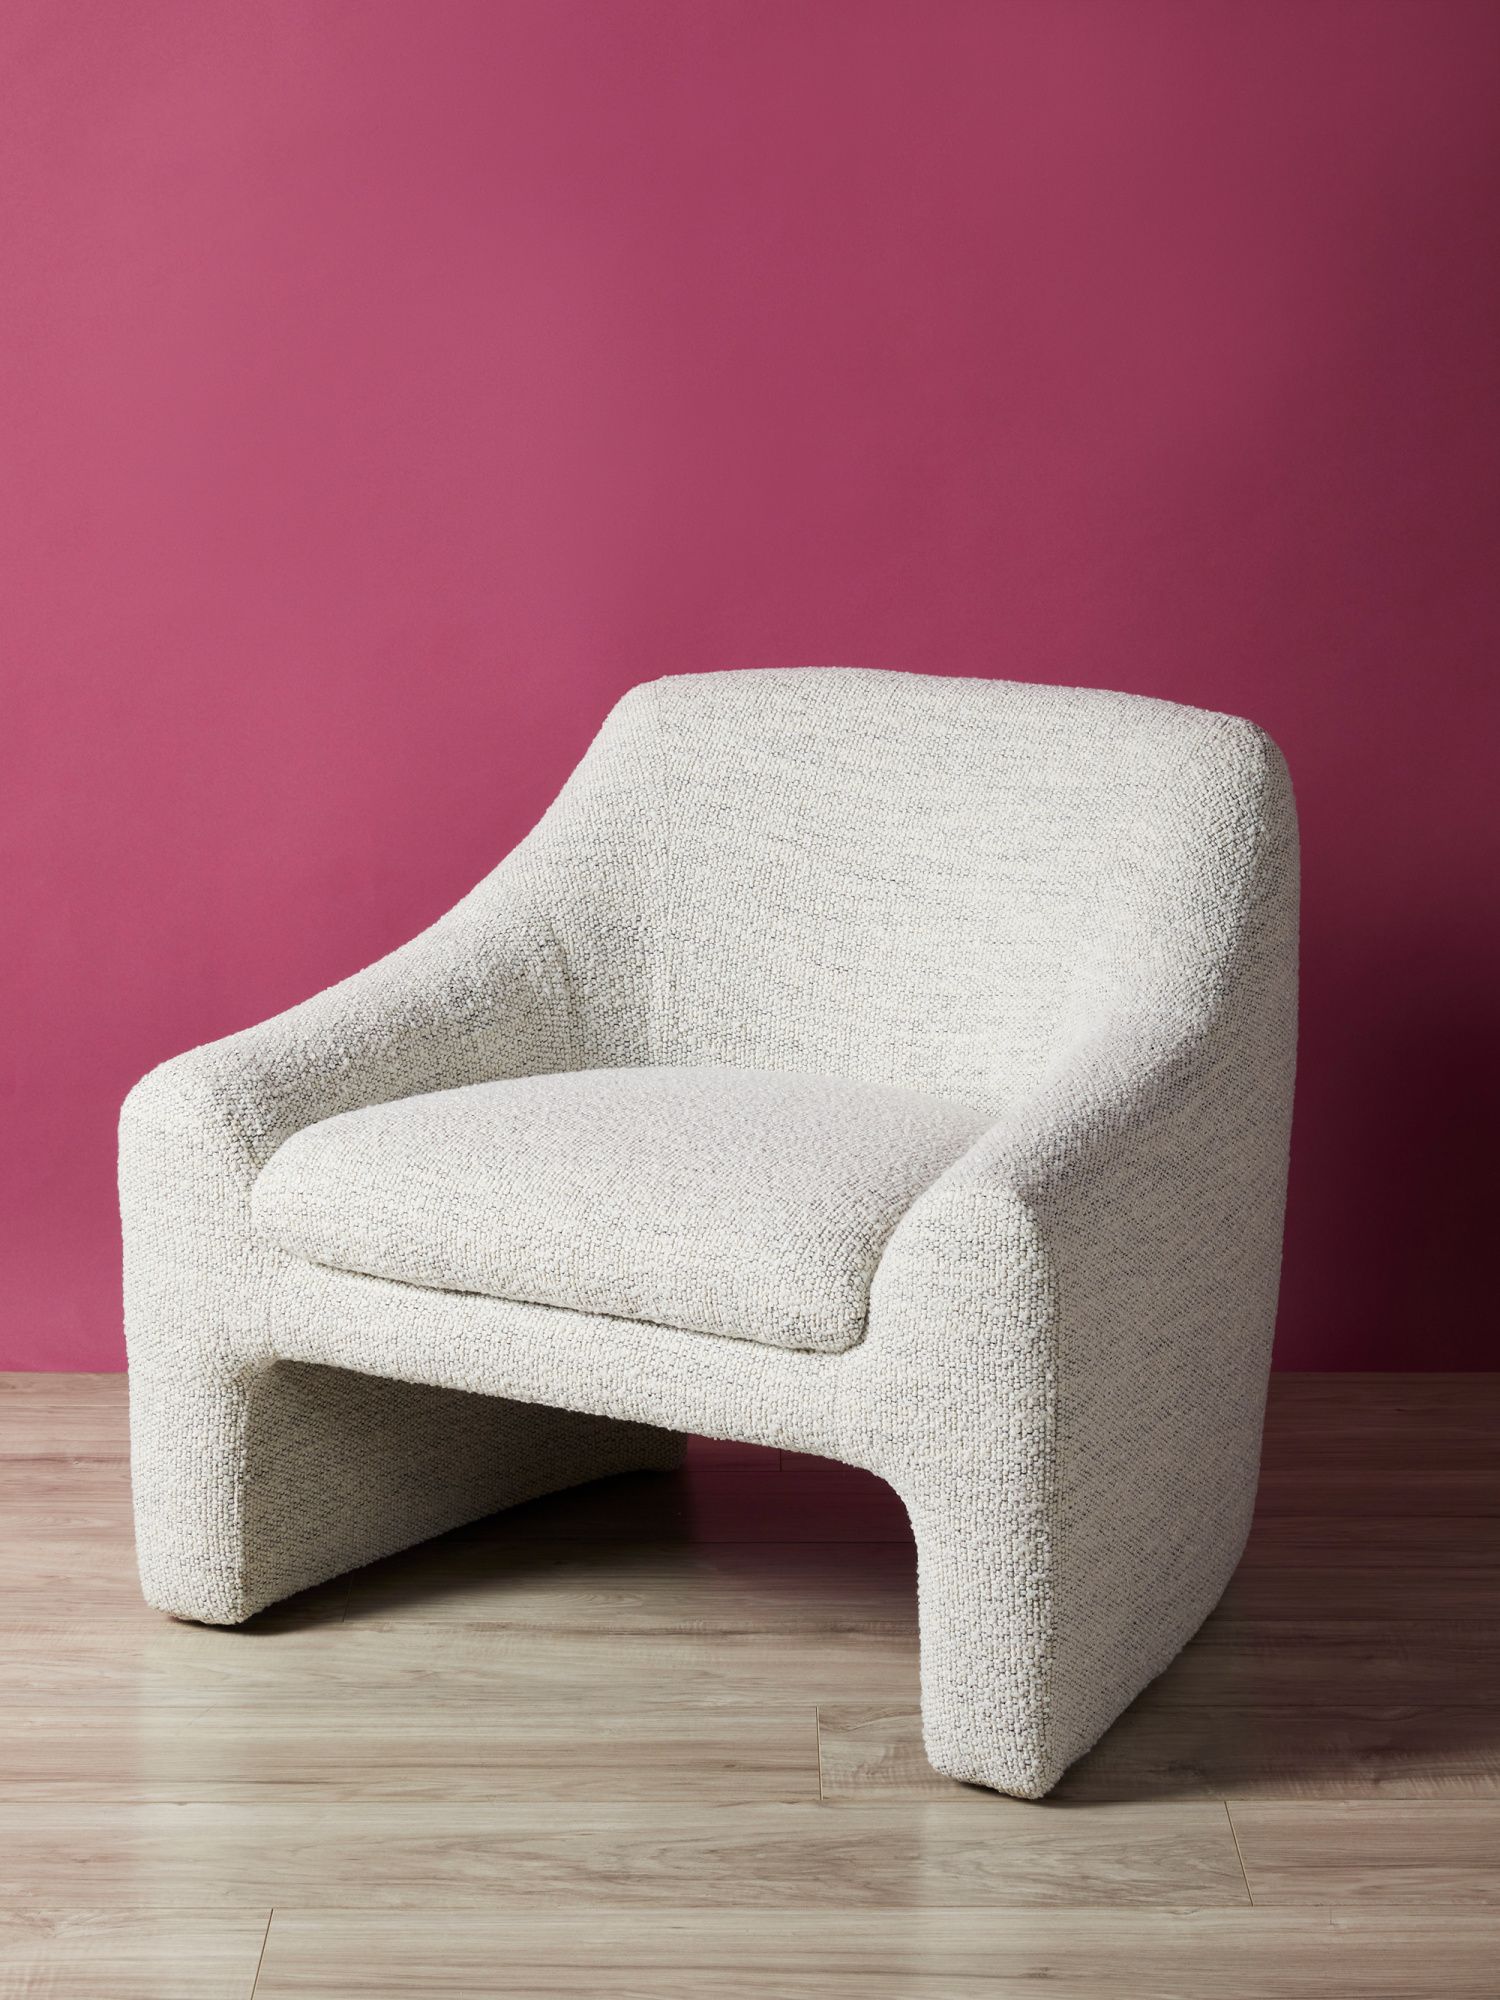 28in Textured Mod Accent Chair | Fall Trends | HomeGoods | HomeGoods